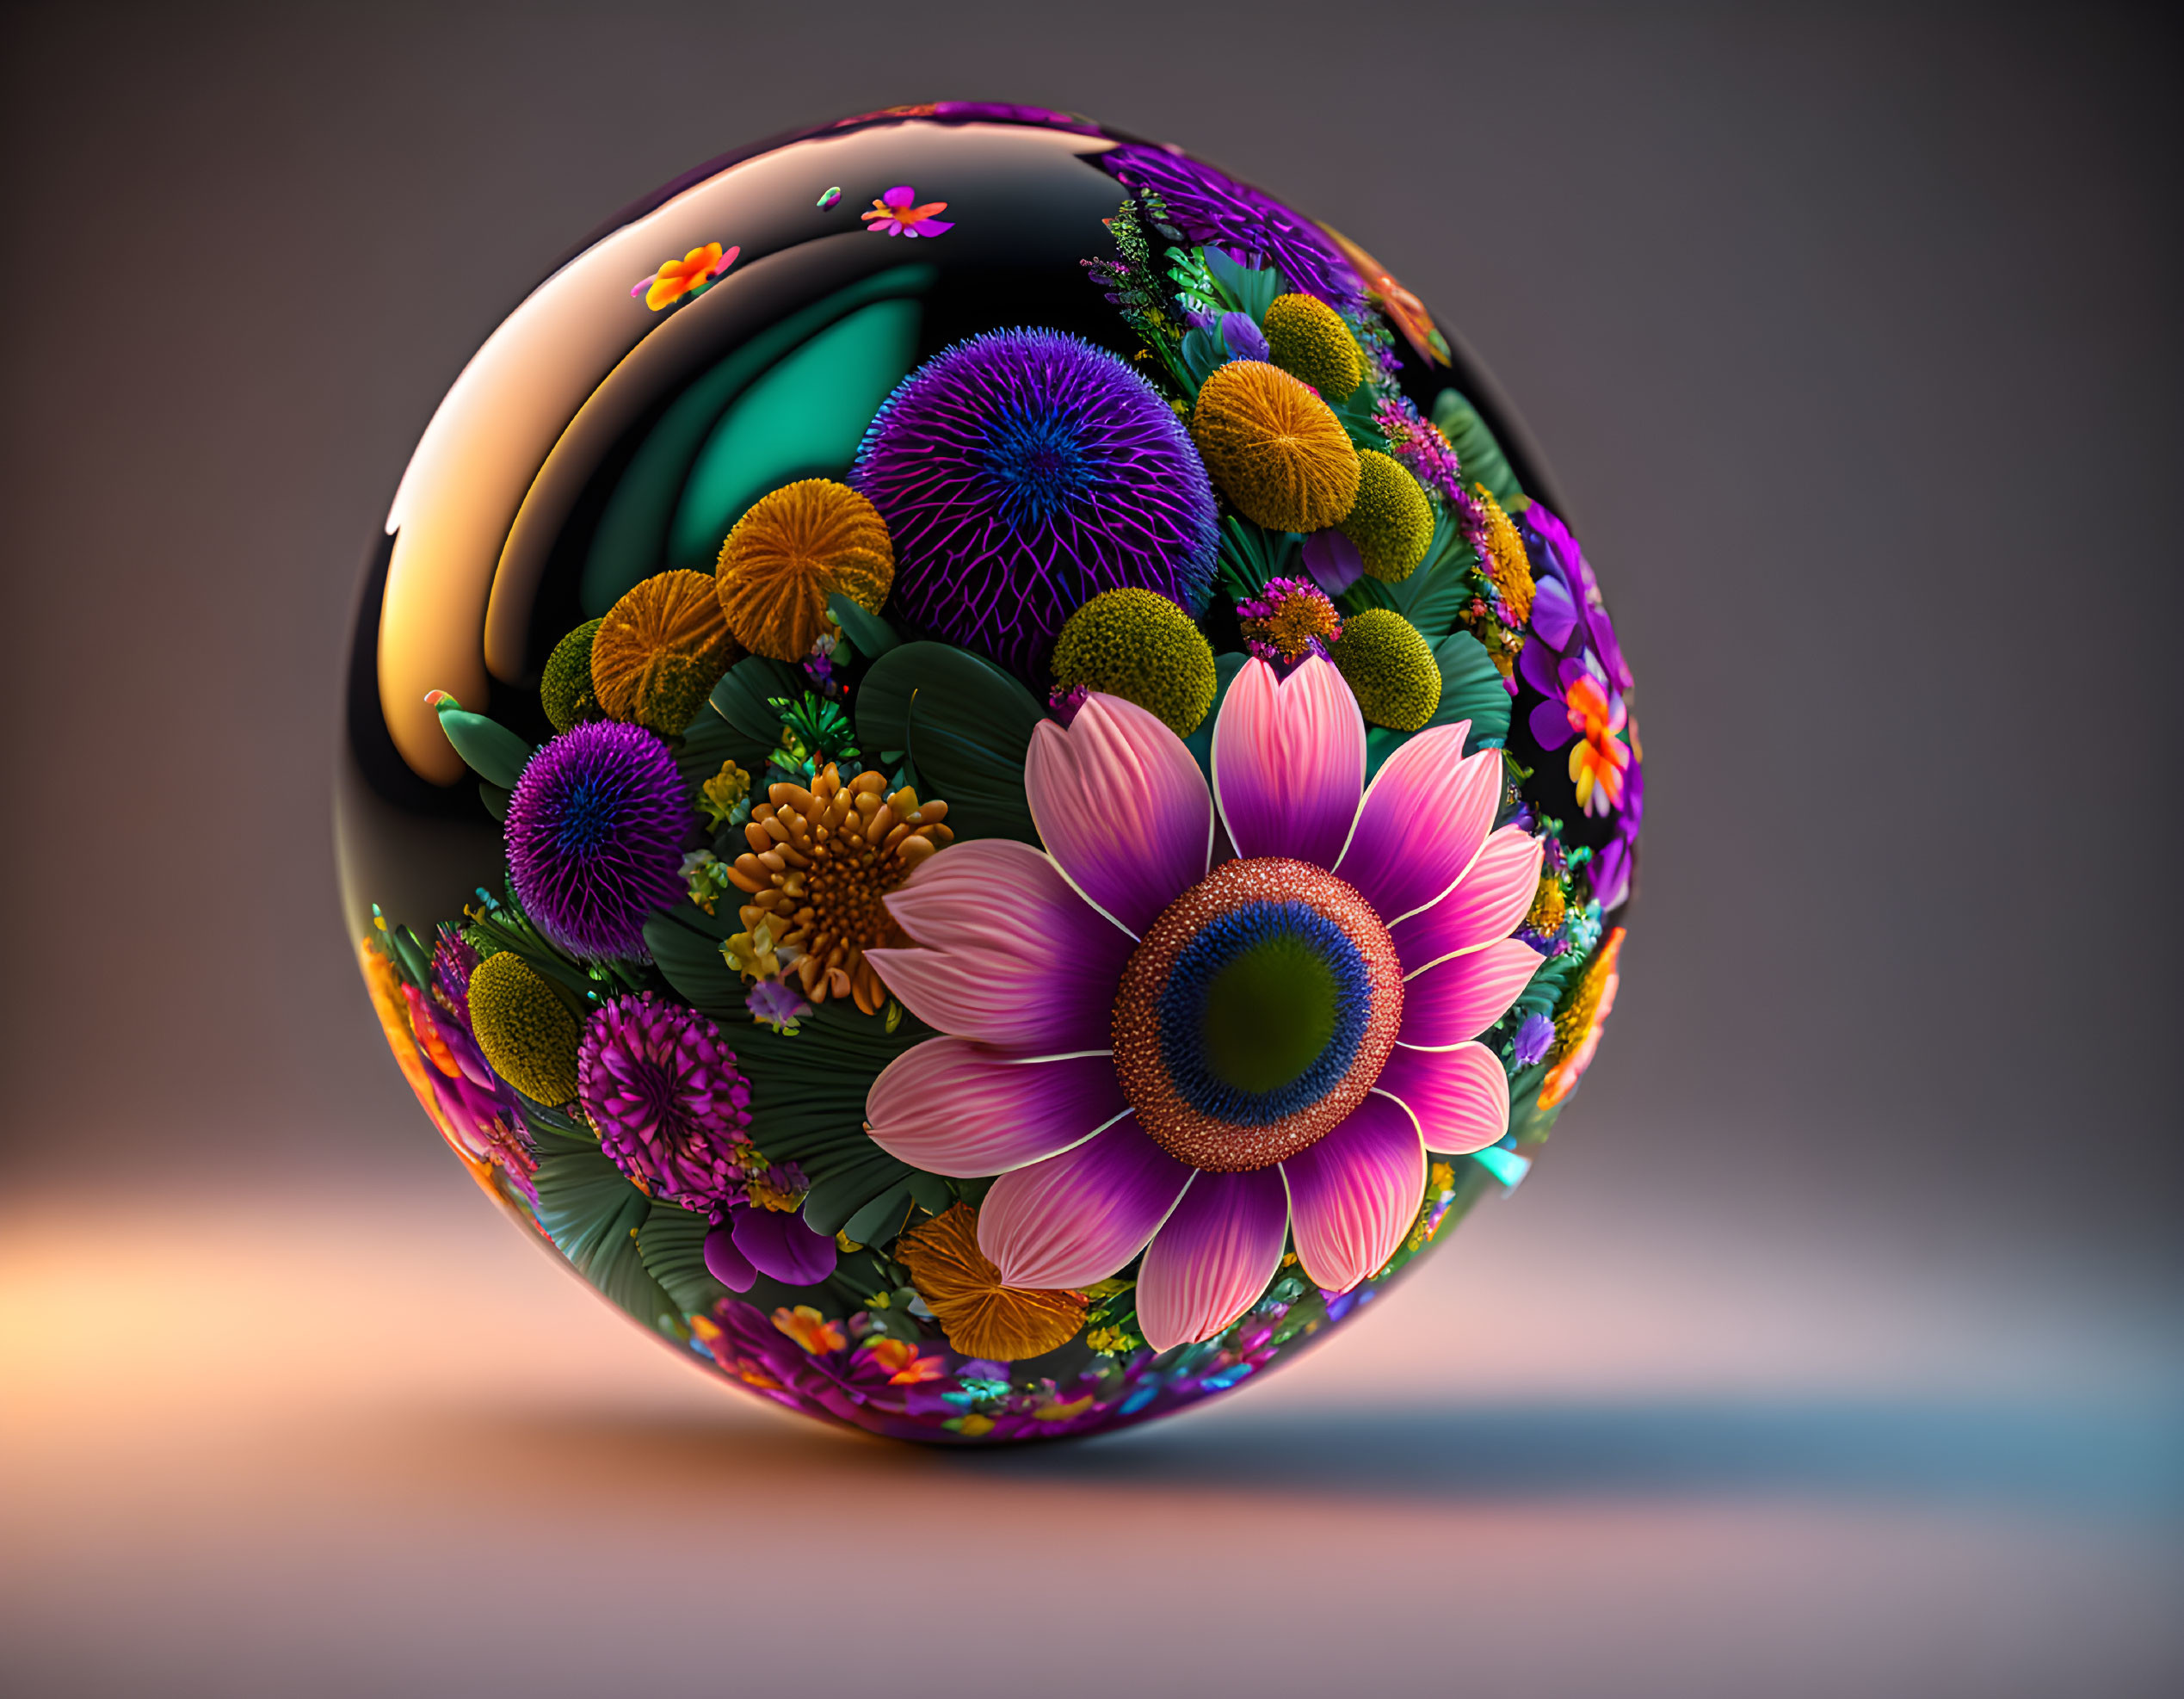 Colorful Floral Patterns on 3D Sphere with Blooming Flowers